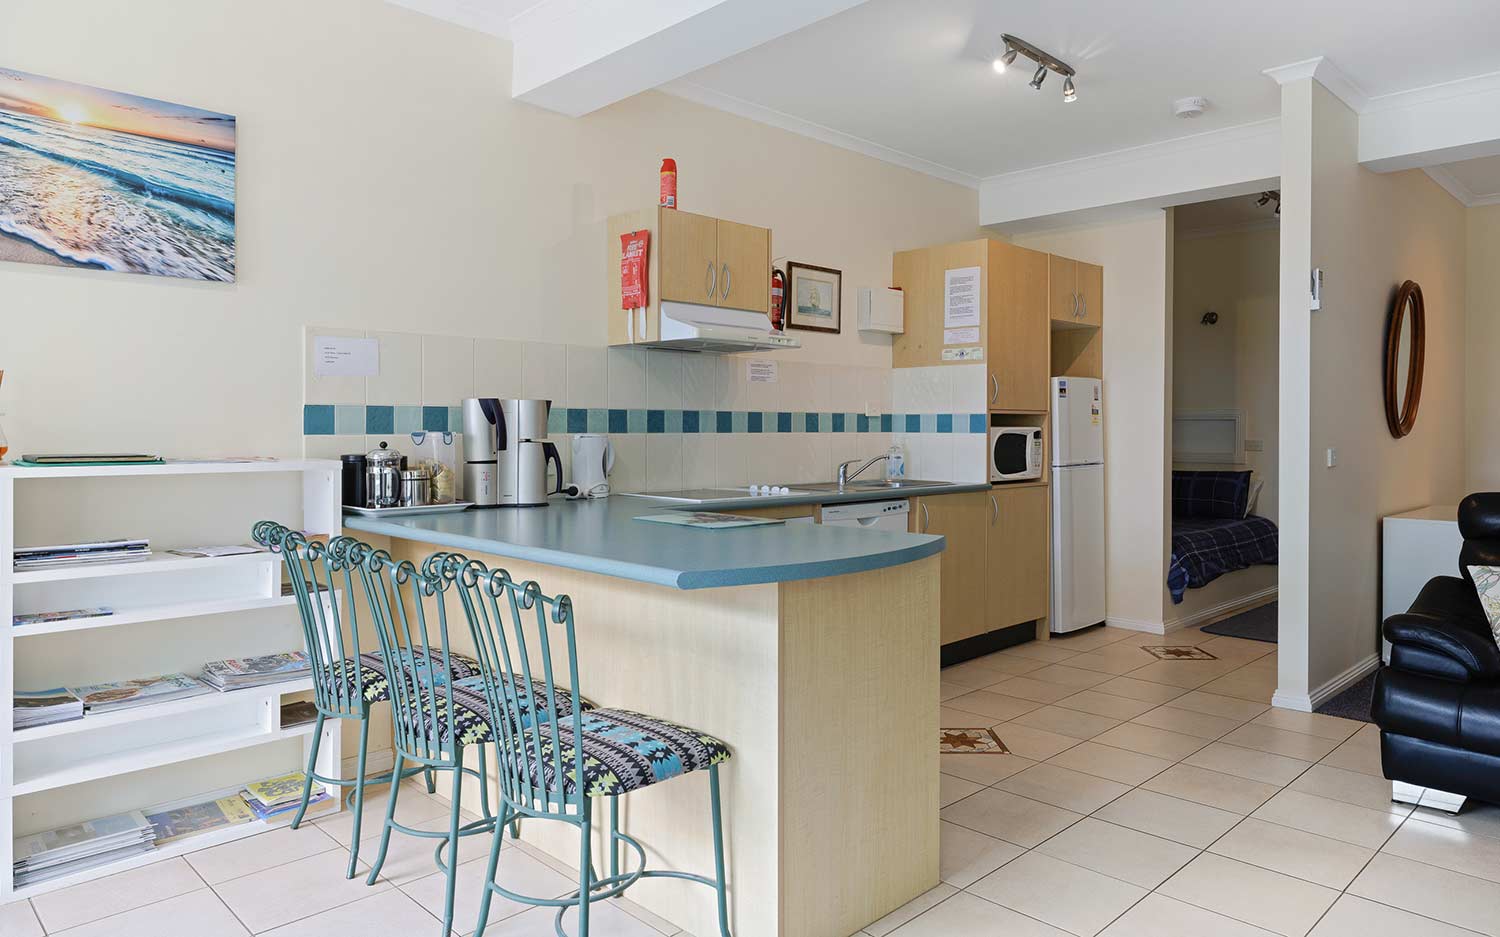 The Black Dolphin Apartment – the kitchen is well appointed with all appliances